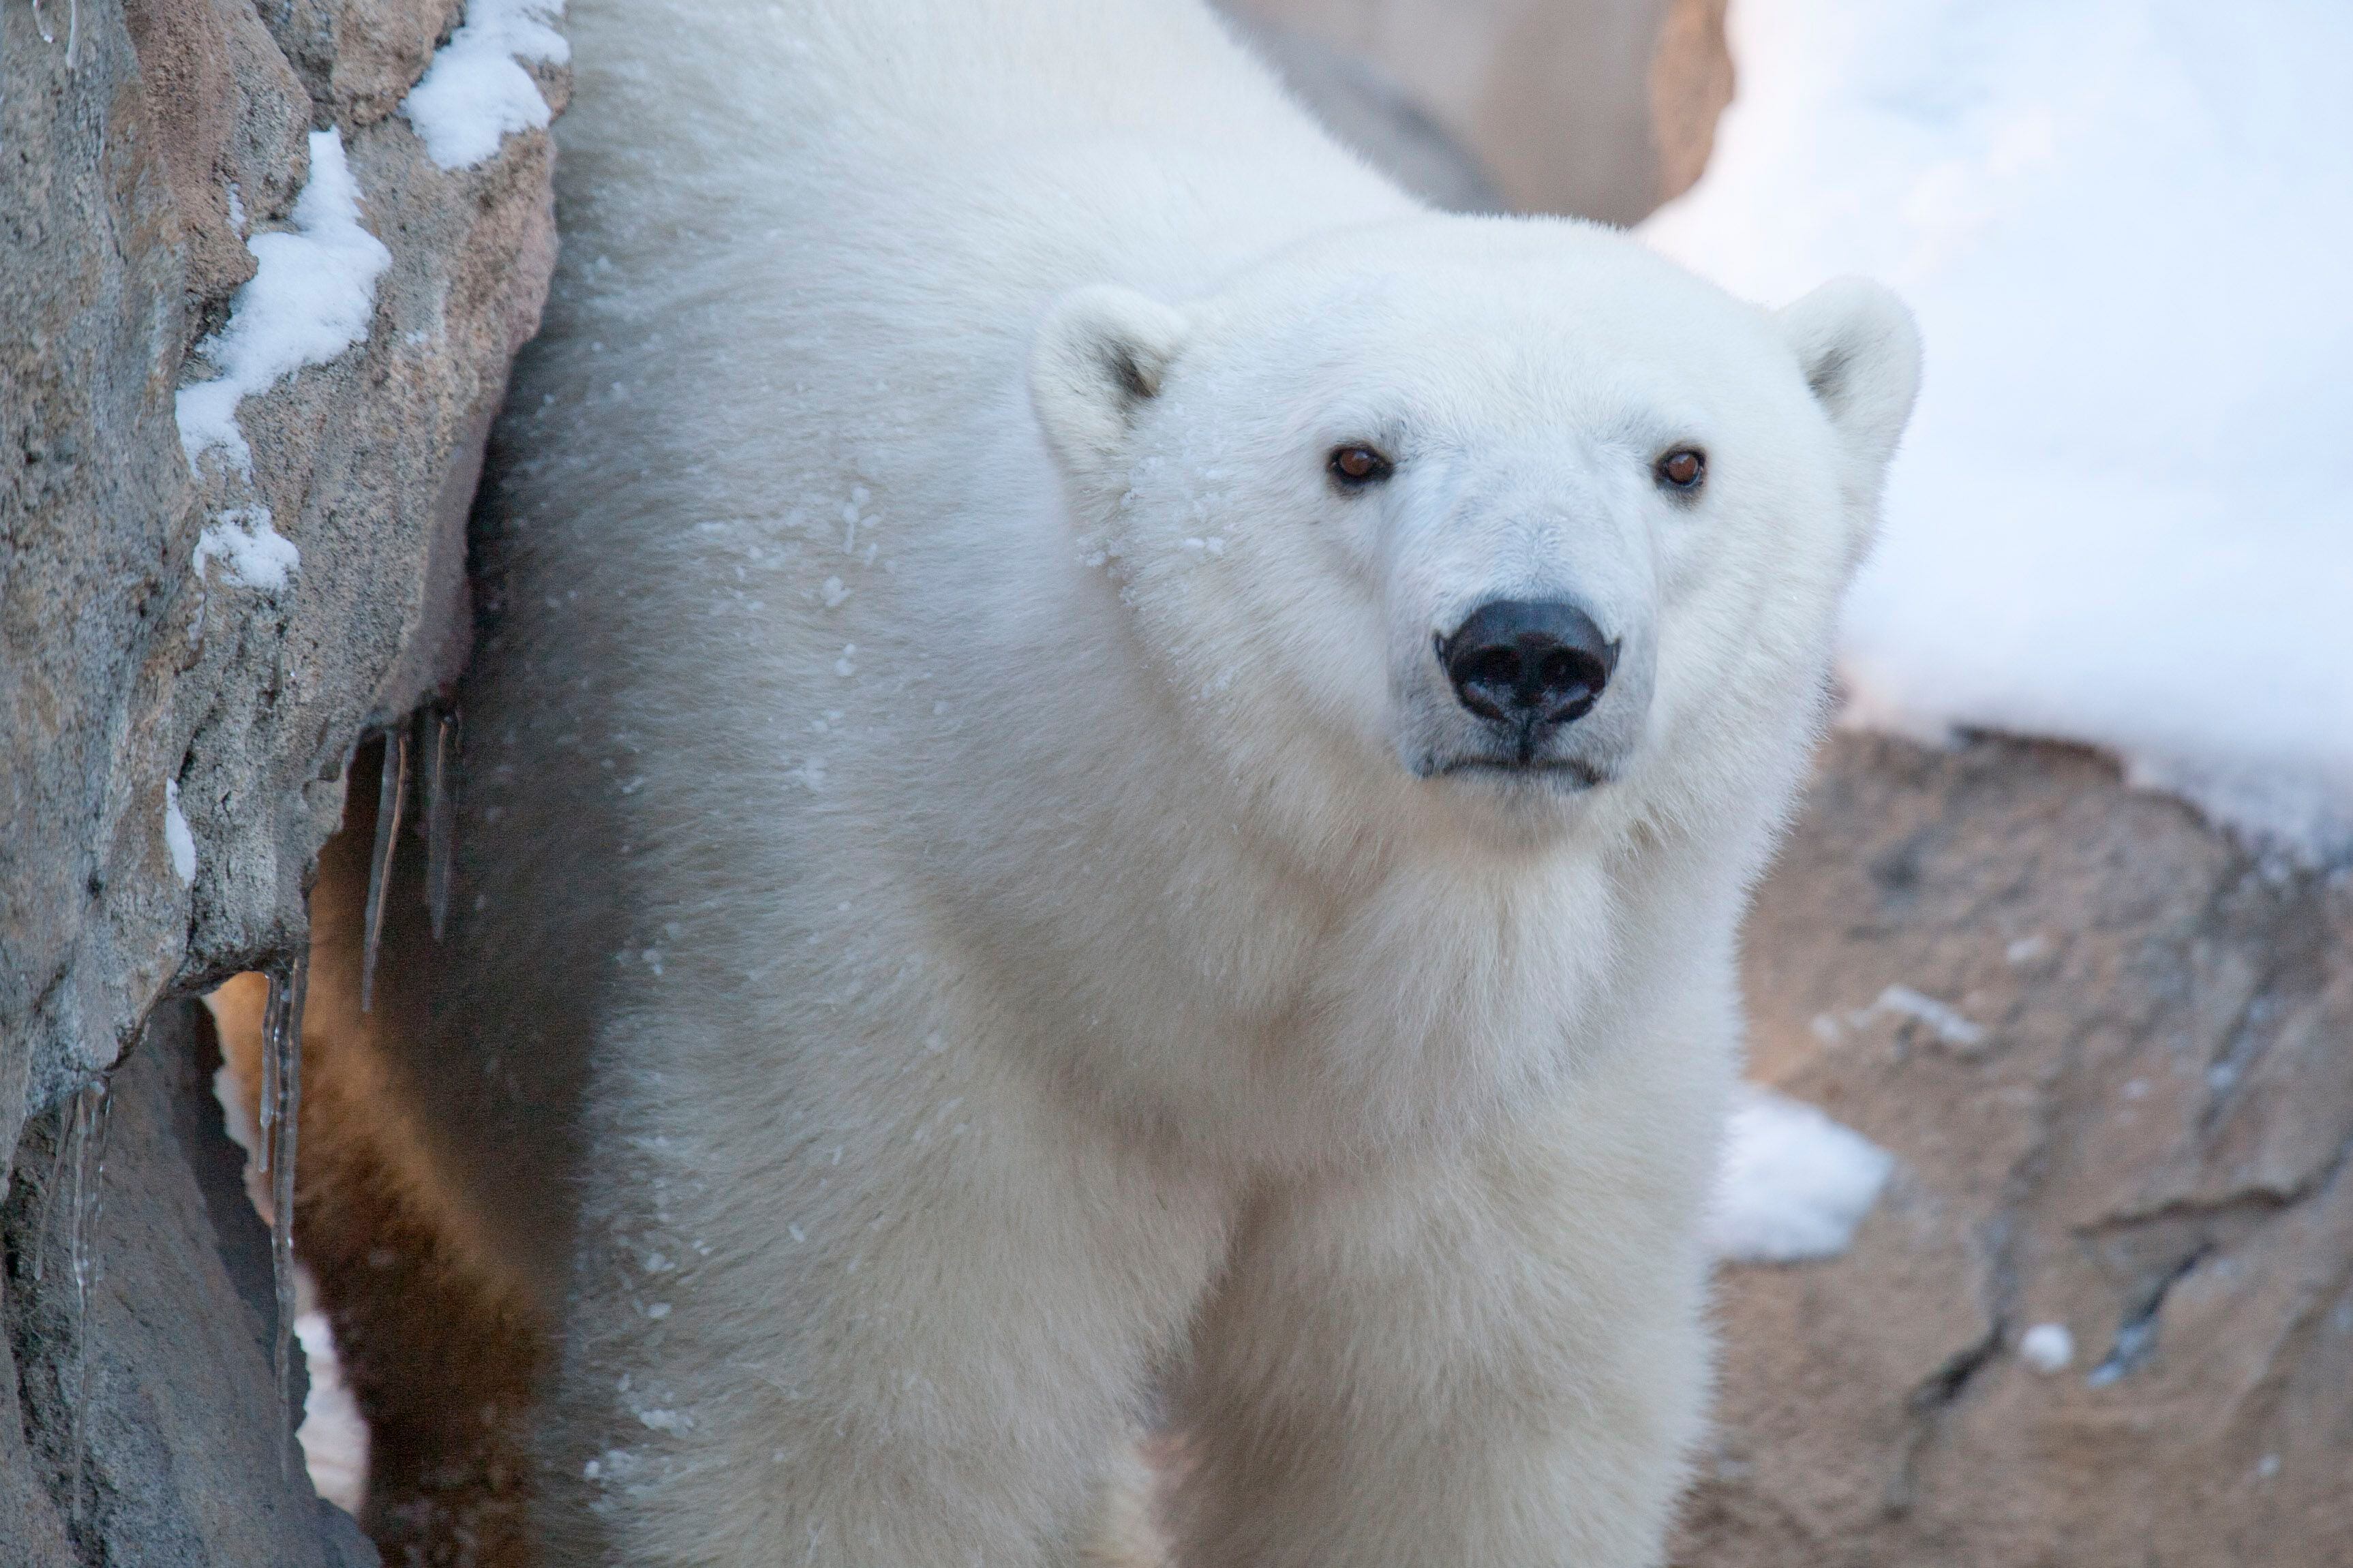 Oregon Zoo's Nora the polar bear helps in Arctic conservation efforts